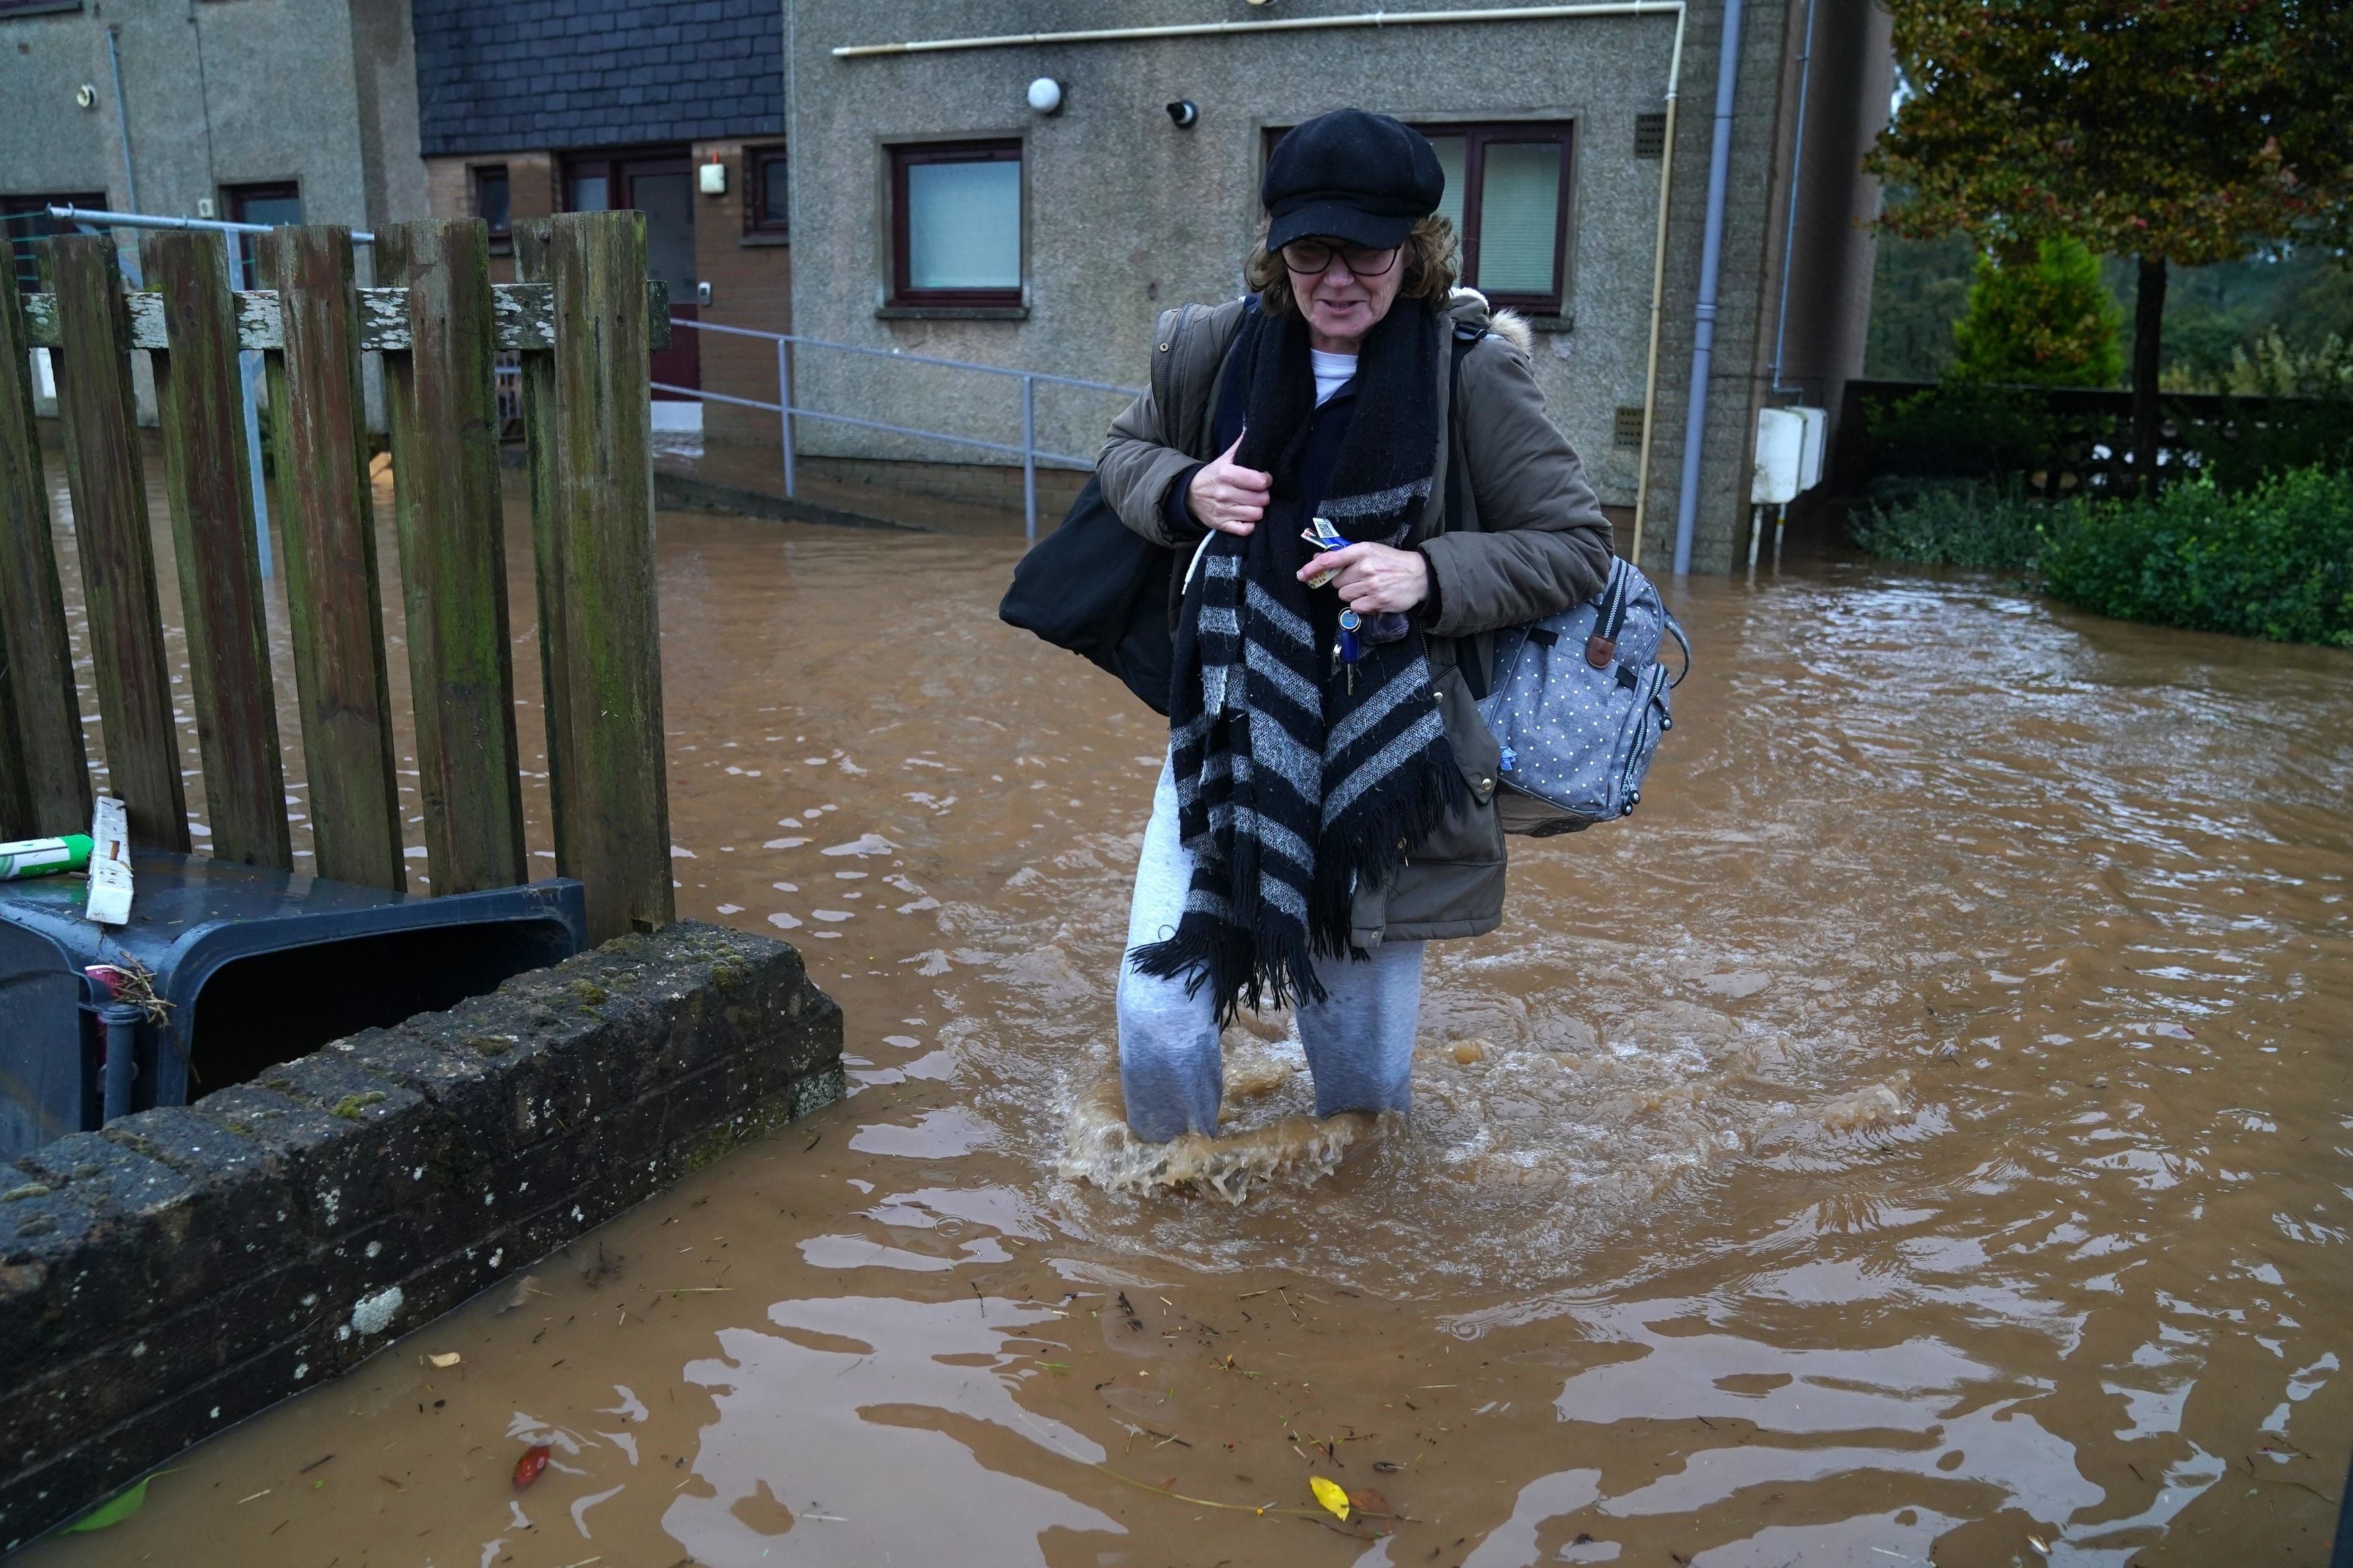 A woman wades through floodwater while clutching her belongings after Storm Babet battered Brechin, Scotland